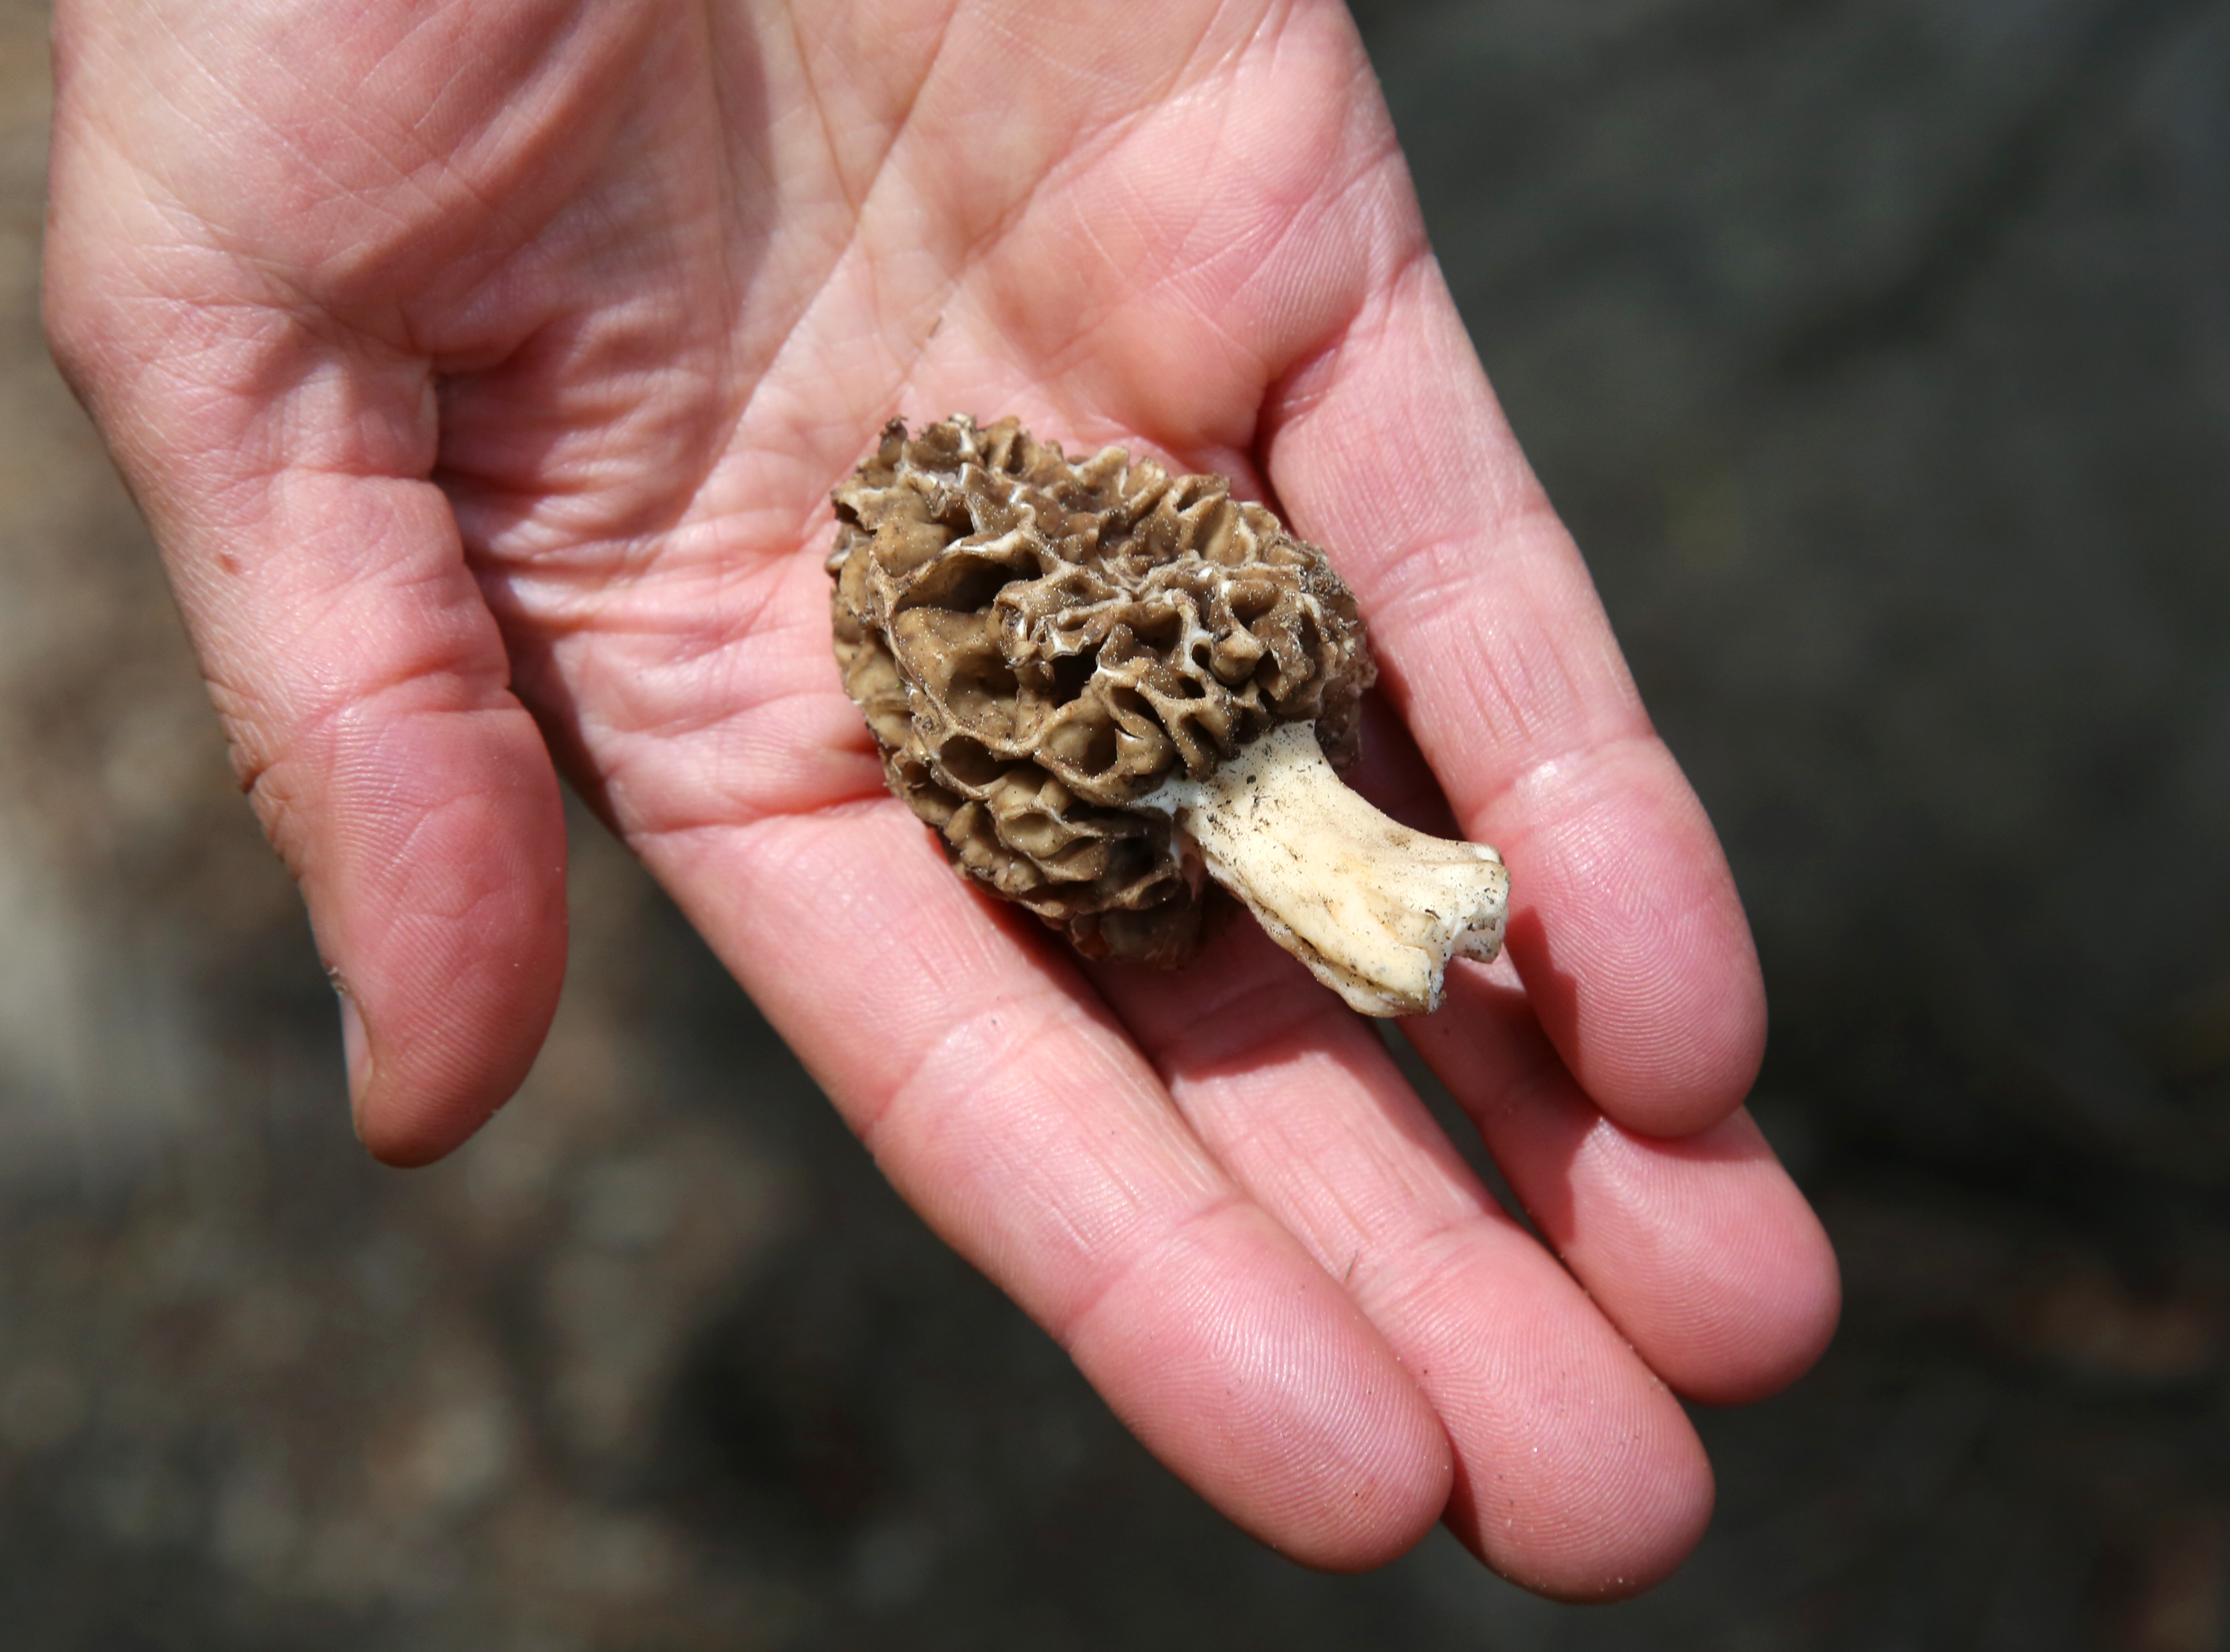 Morel mushrooms are linked to deadly food poisoning outbreaks;  The Food and Drug Administration (FDA) issues its first-ever preparation guidance